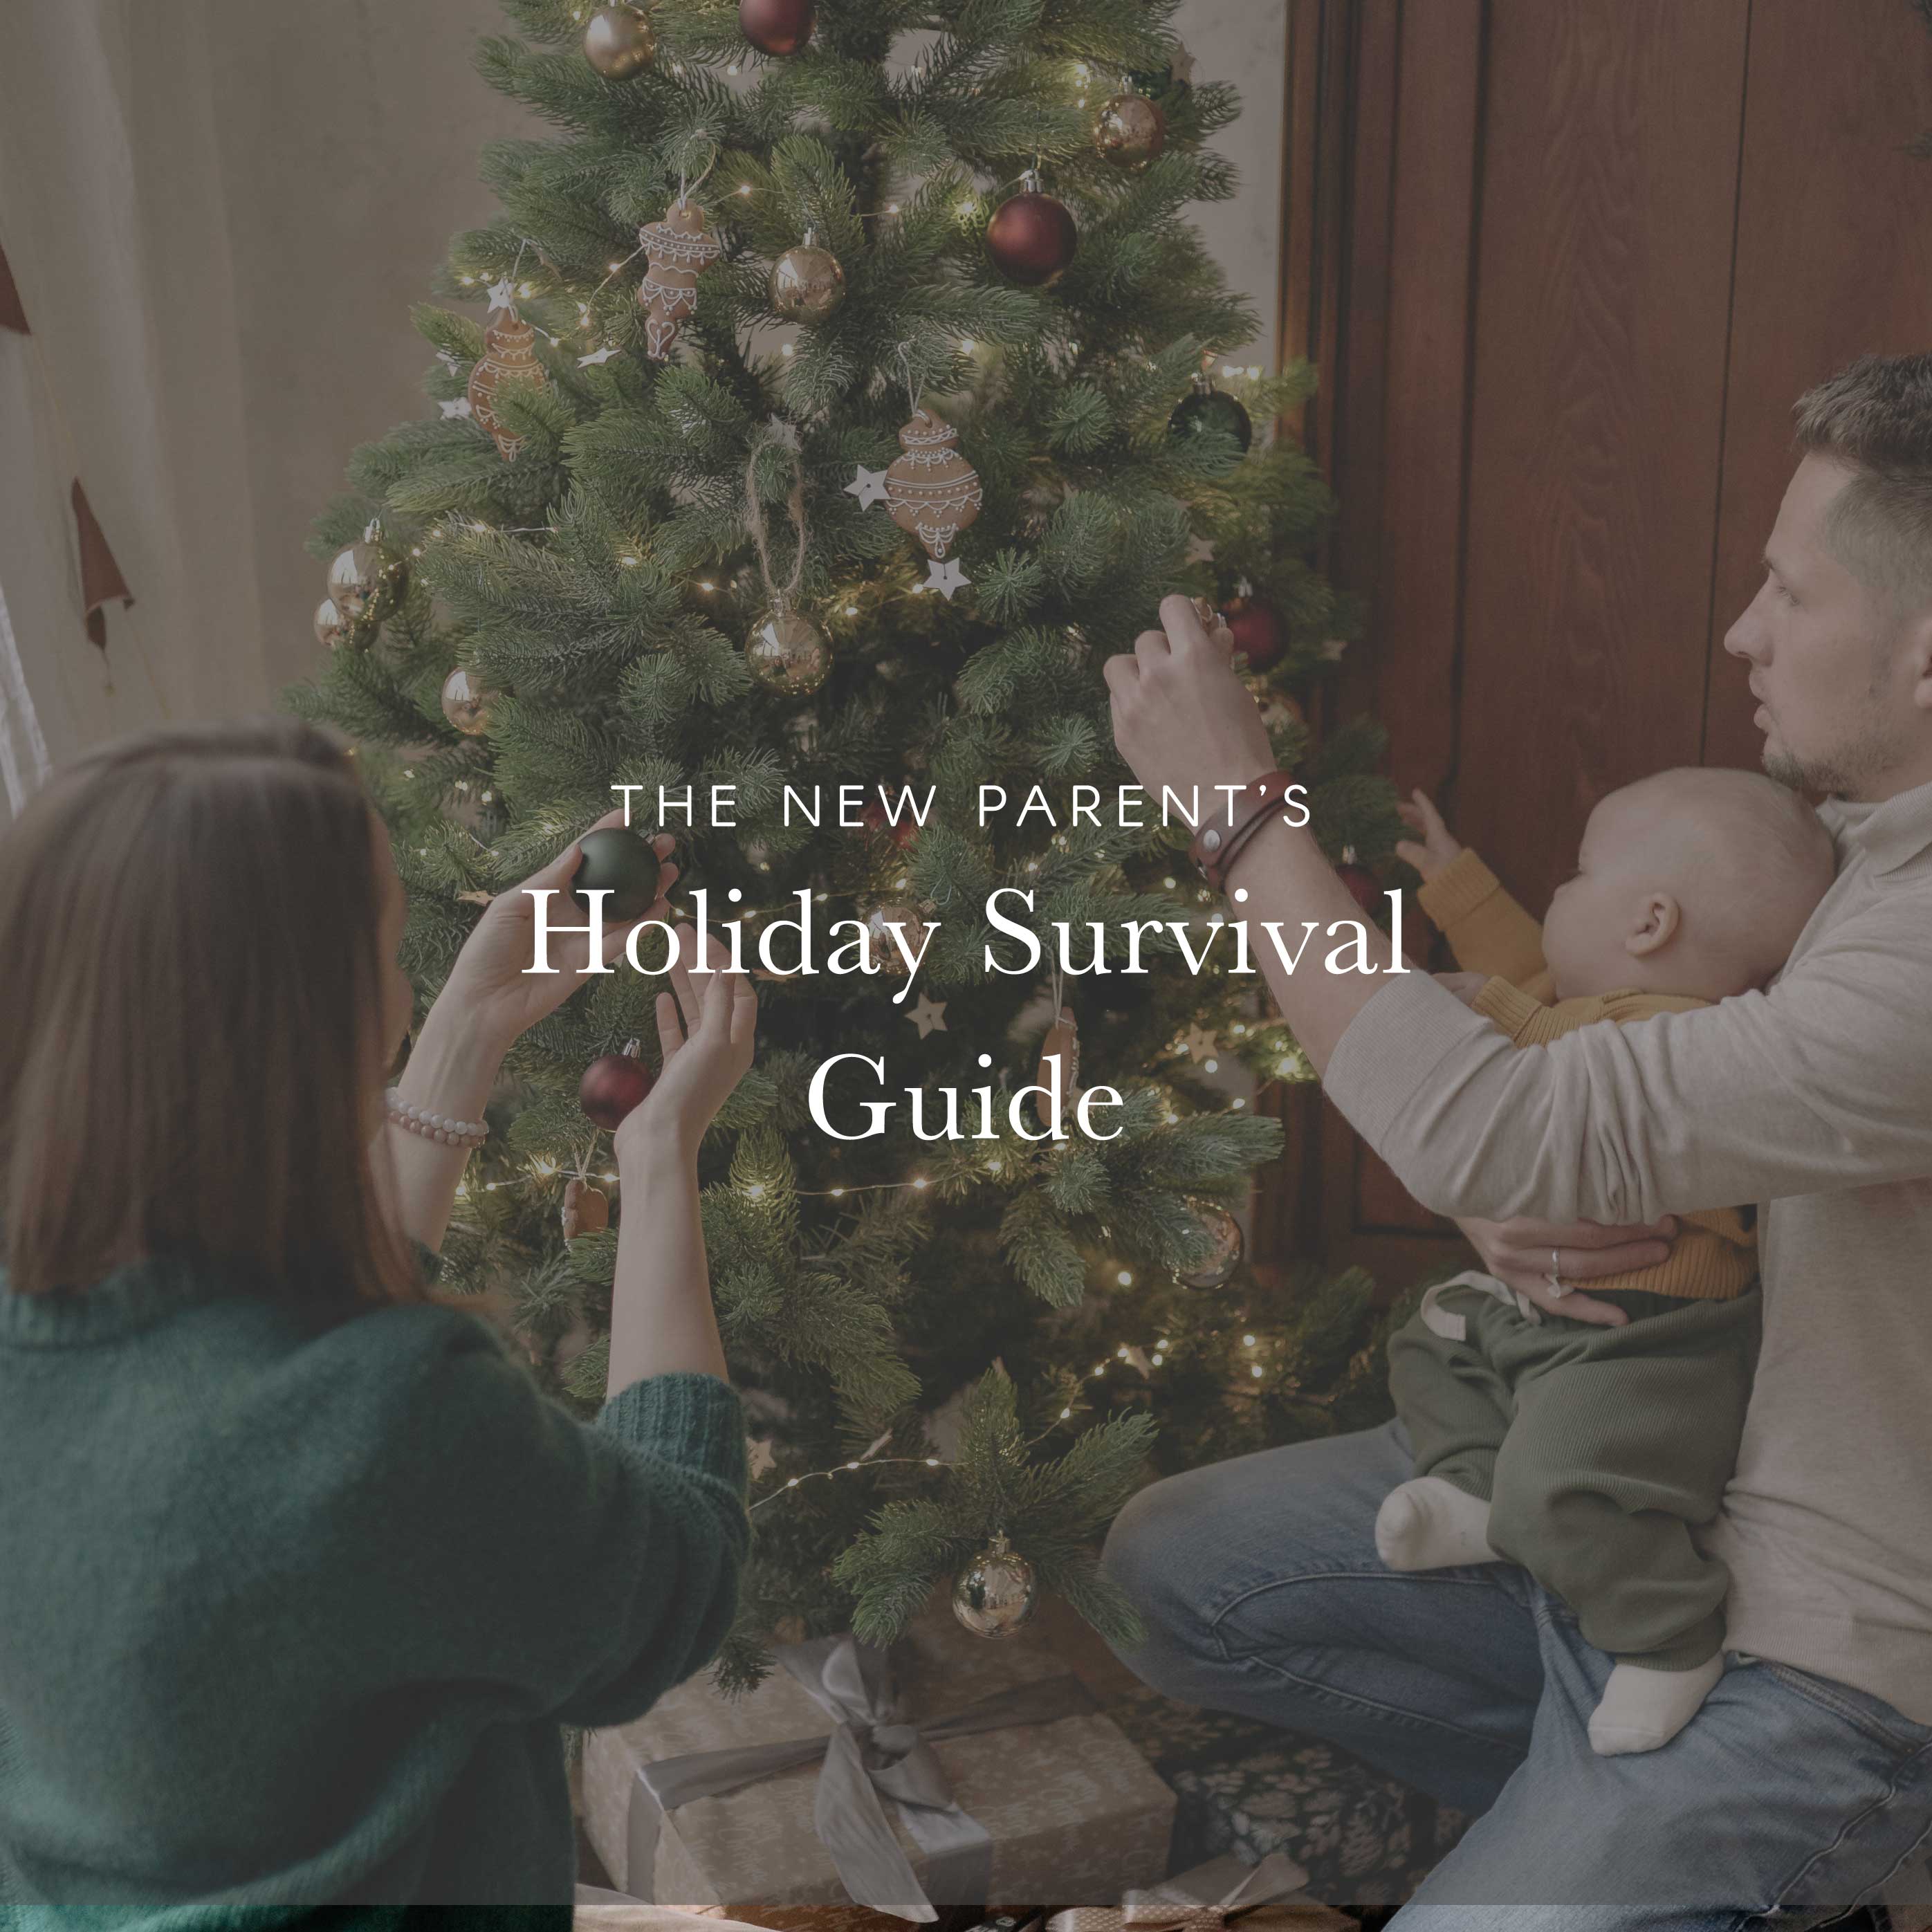 The New Parent’s Holiday Survival Guide